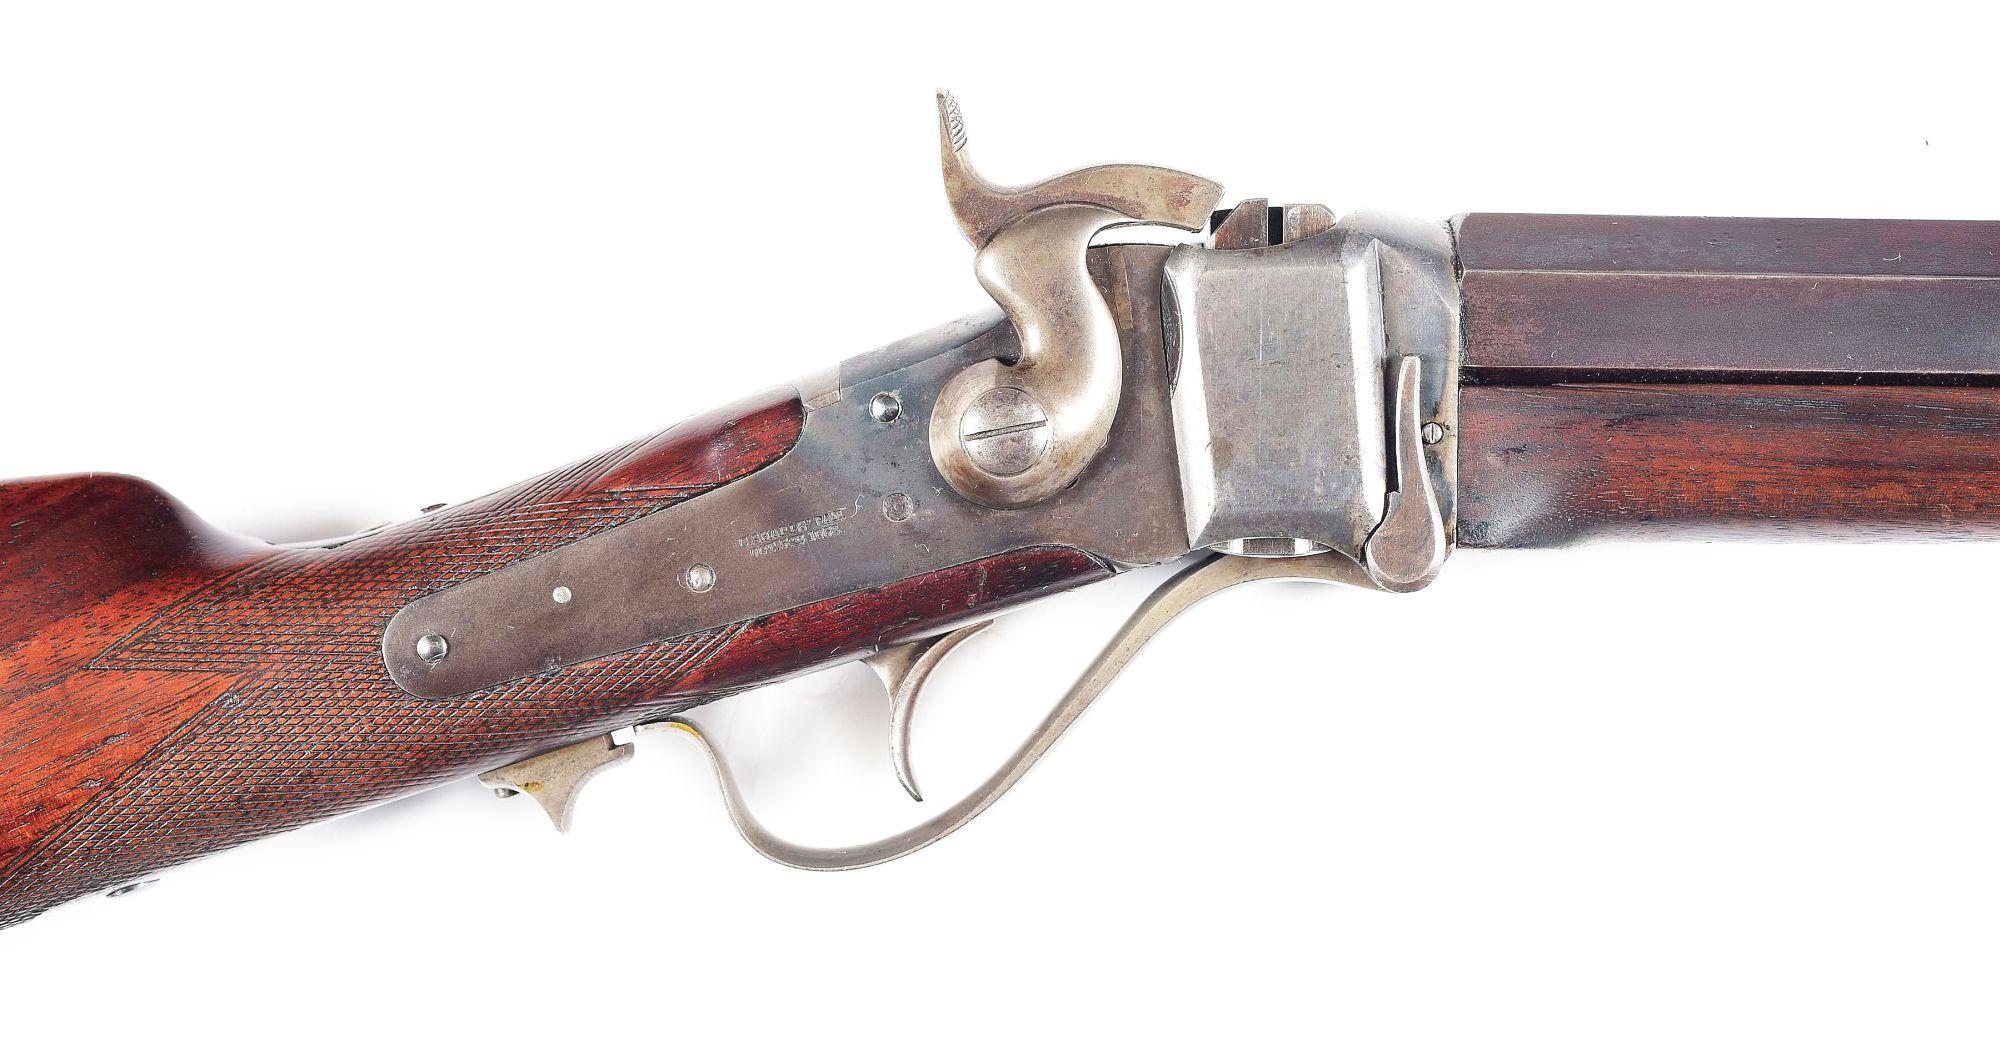 (A) ATTRIBUTED WALTER COOPER CONVERSION OF SHARPS MODEL 1863 SINGLE SHOT RIFLE